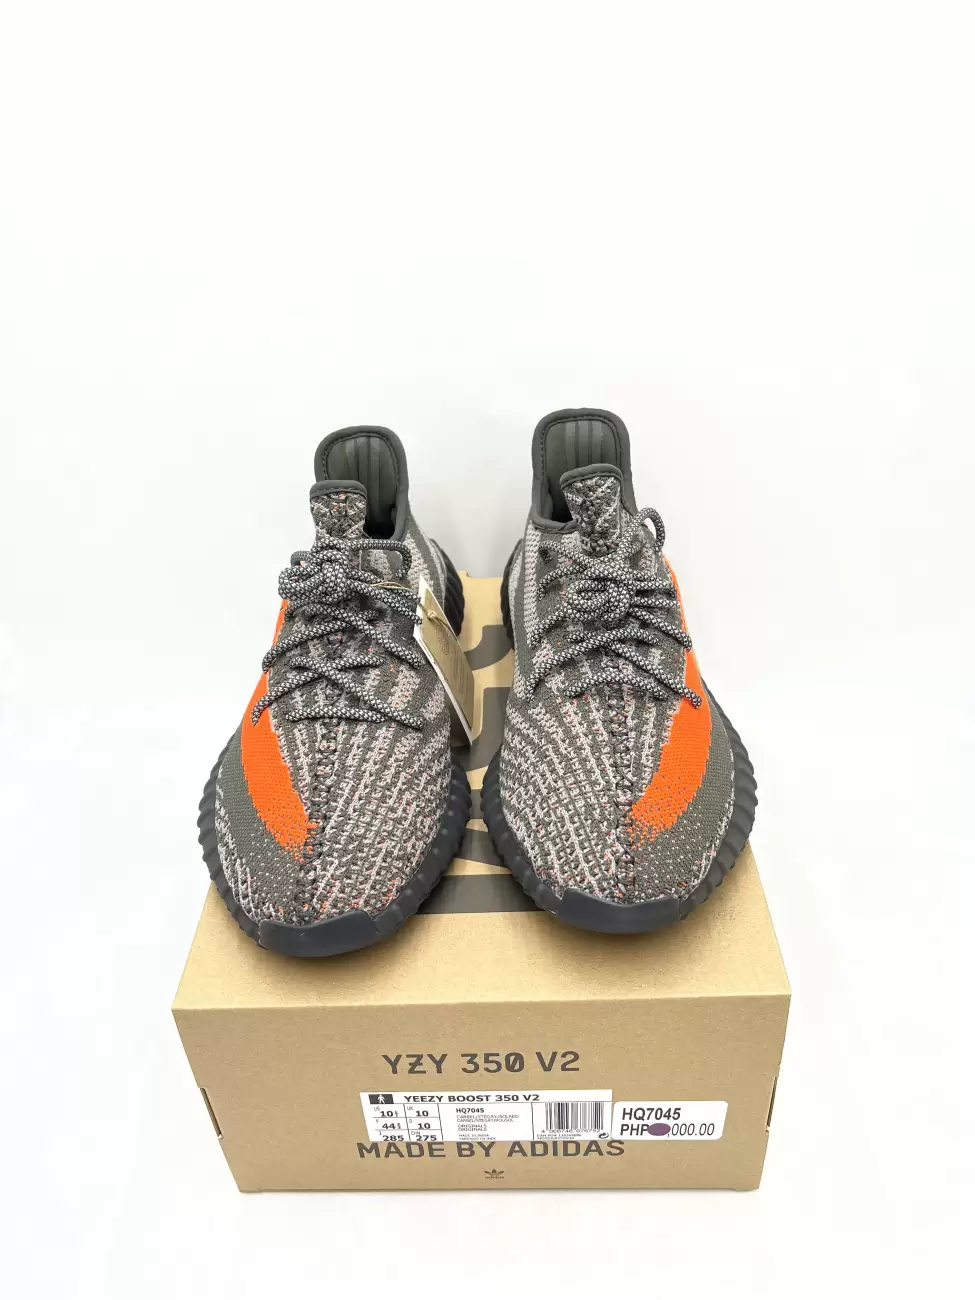 Authentic Adidas YEEZY Boost 350 V2, HQ7045, Size 10, Brand New in Box